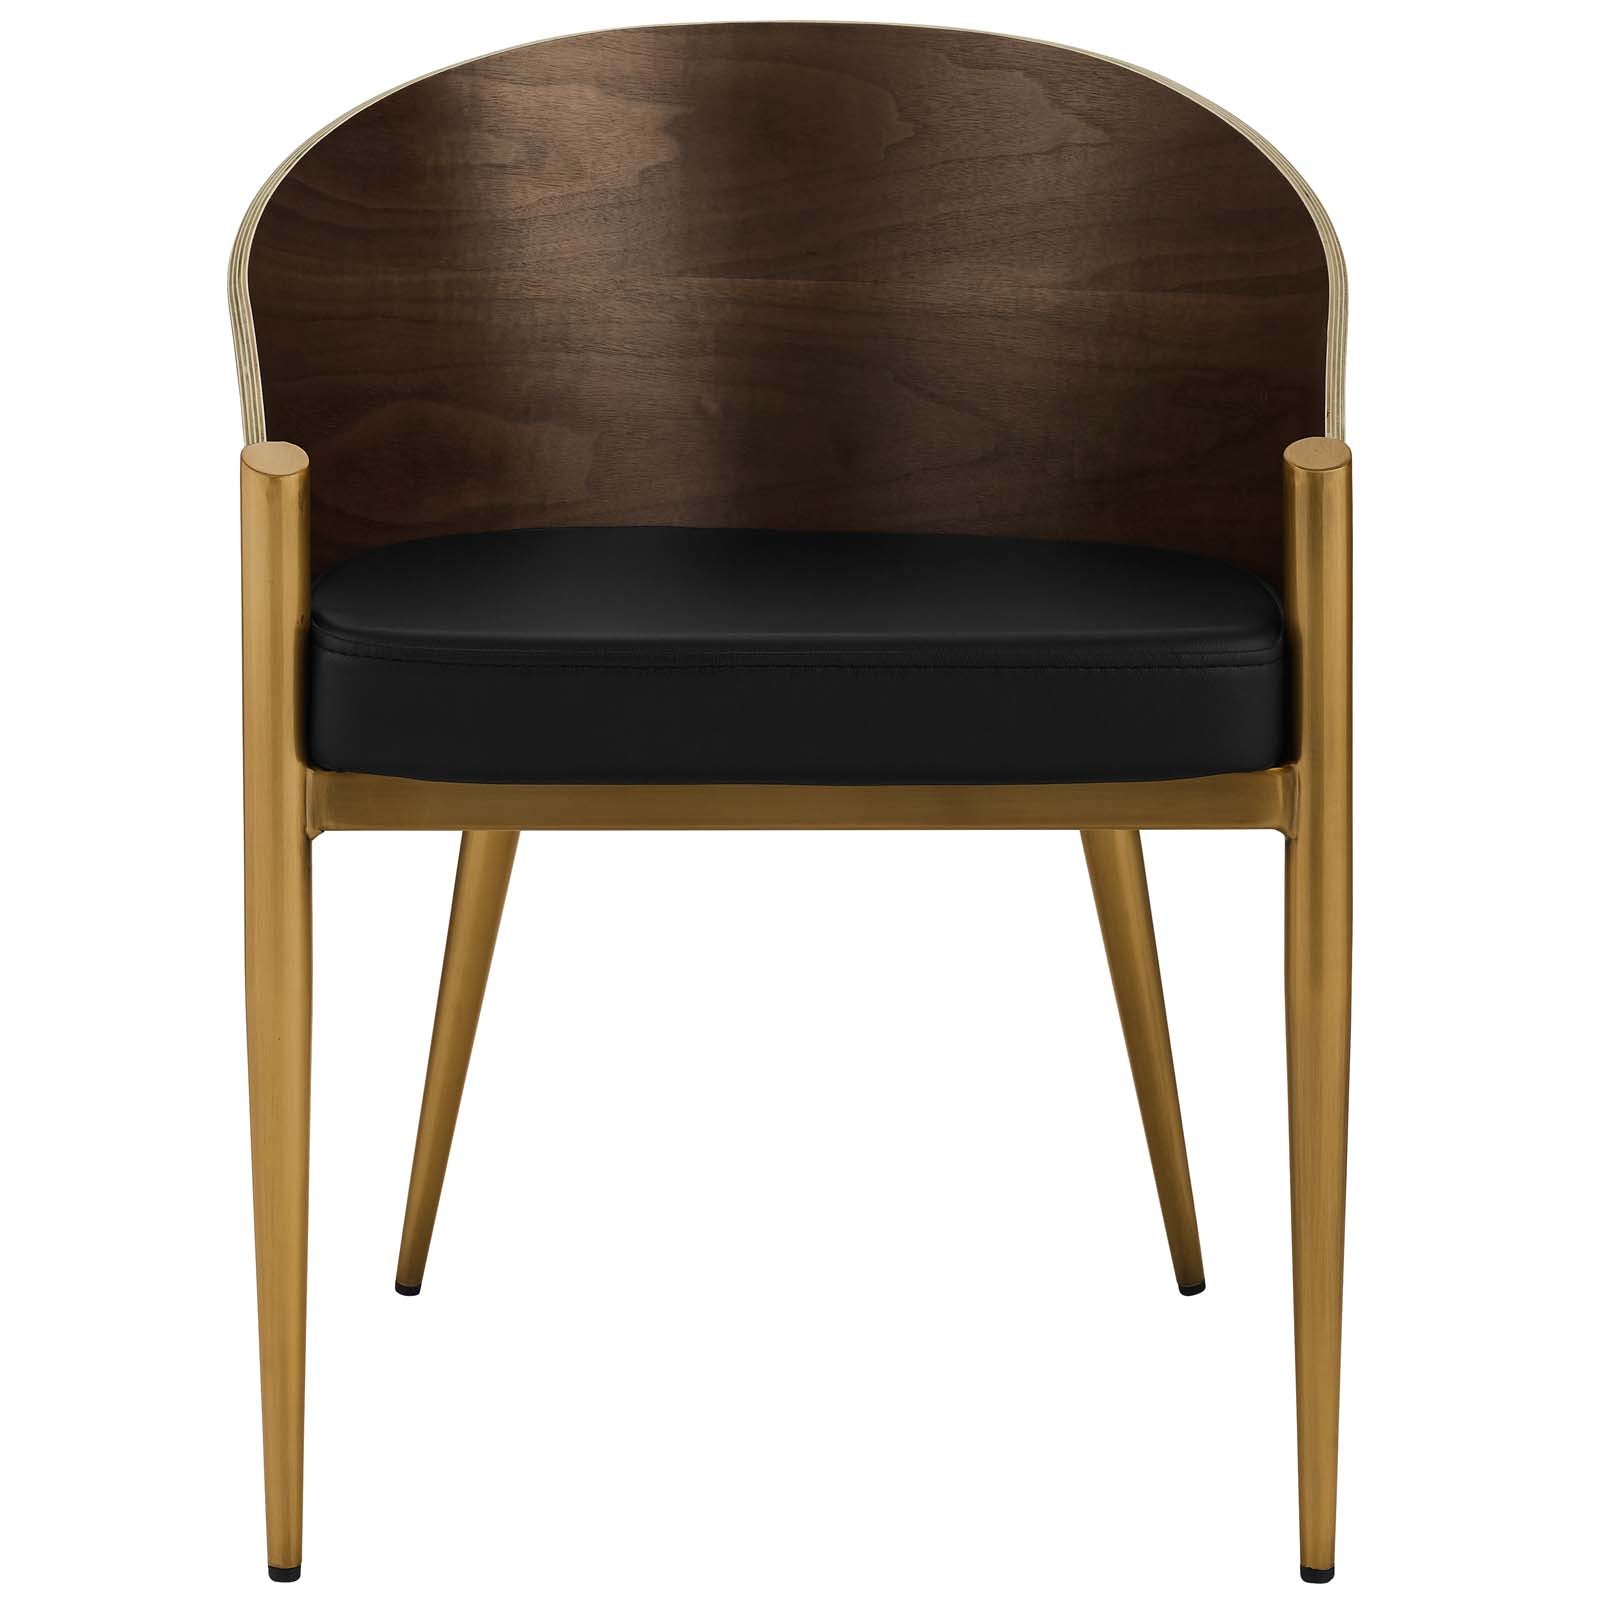 Contemporary Modern Copper Dining Room Chair  - Club Chair In Walnut